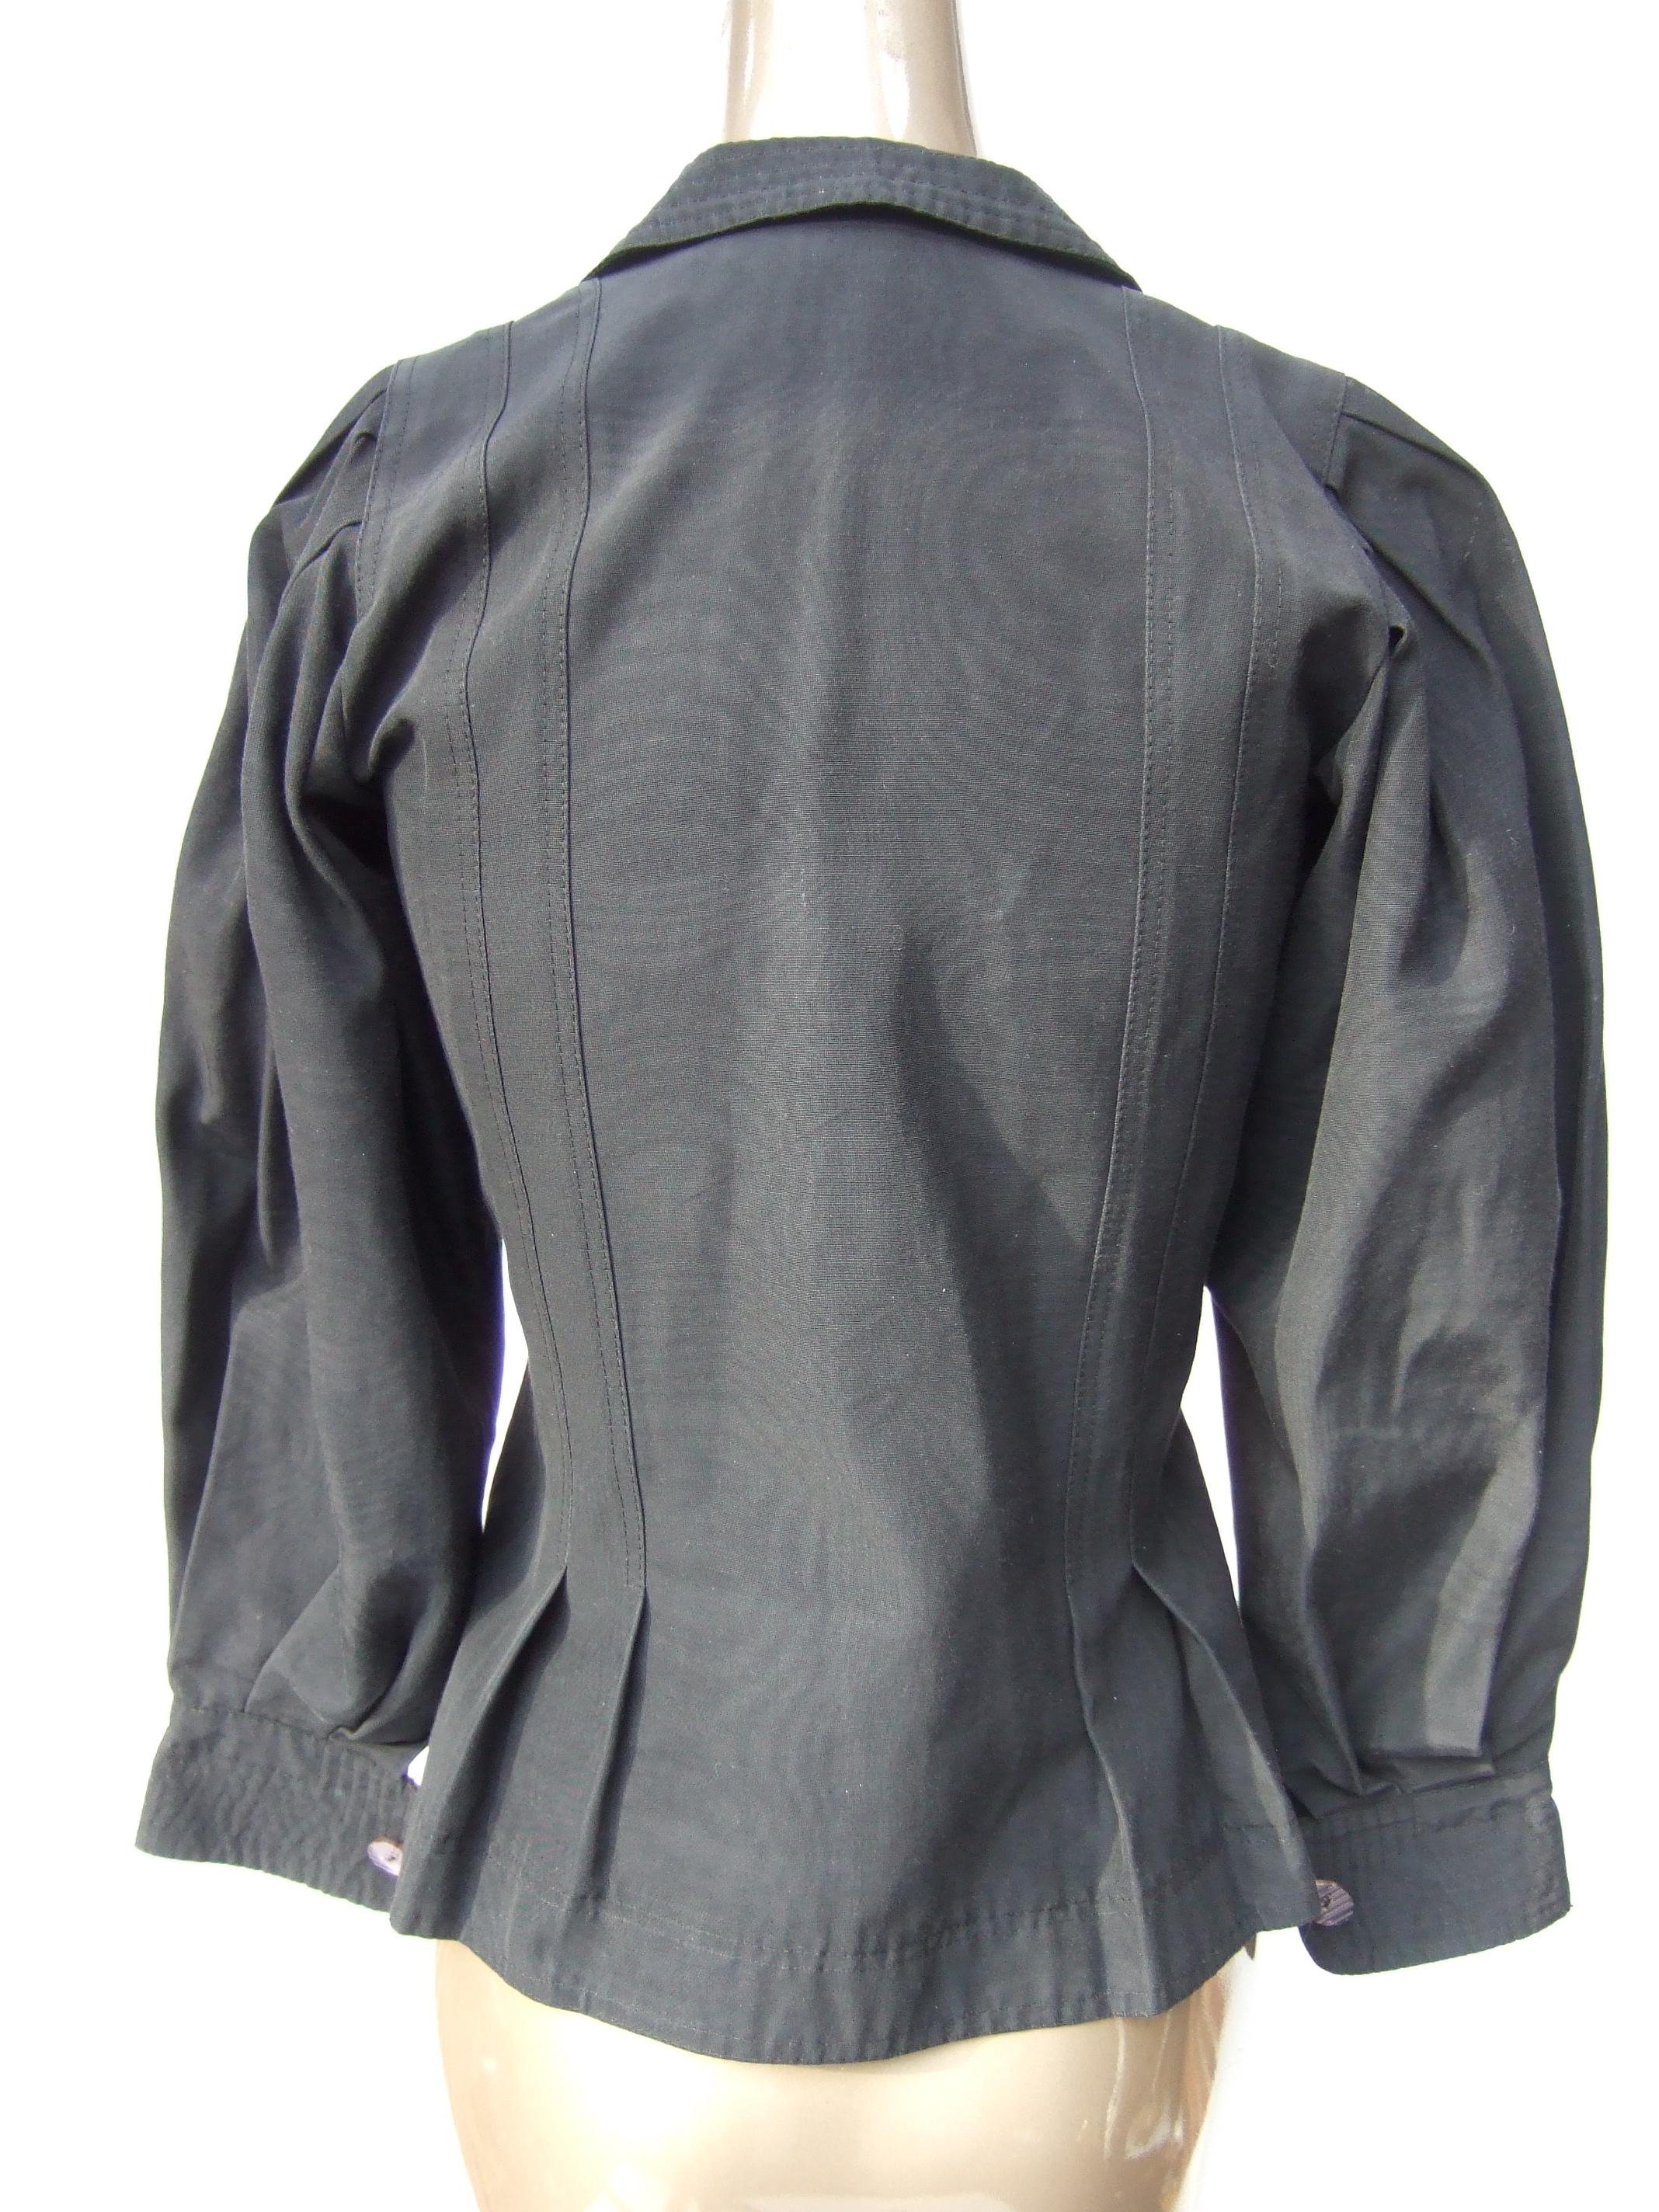 Jean Muir London Black Fitted Jacket for Neiman-Marcus c 1970s For Sale 5